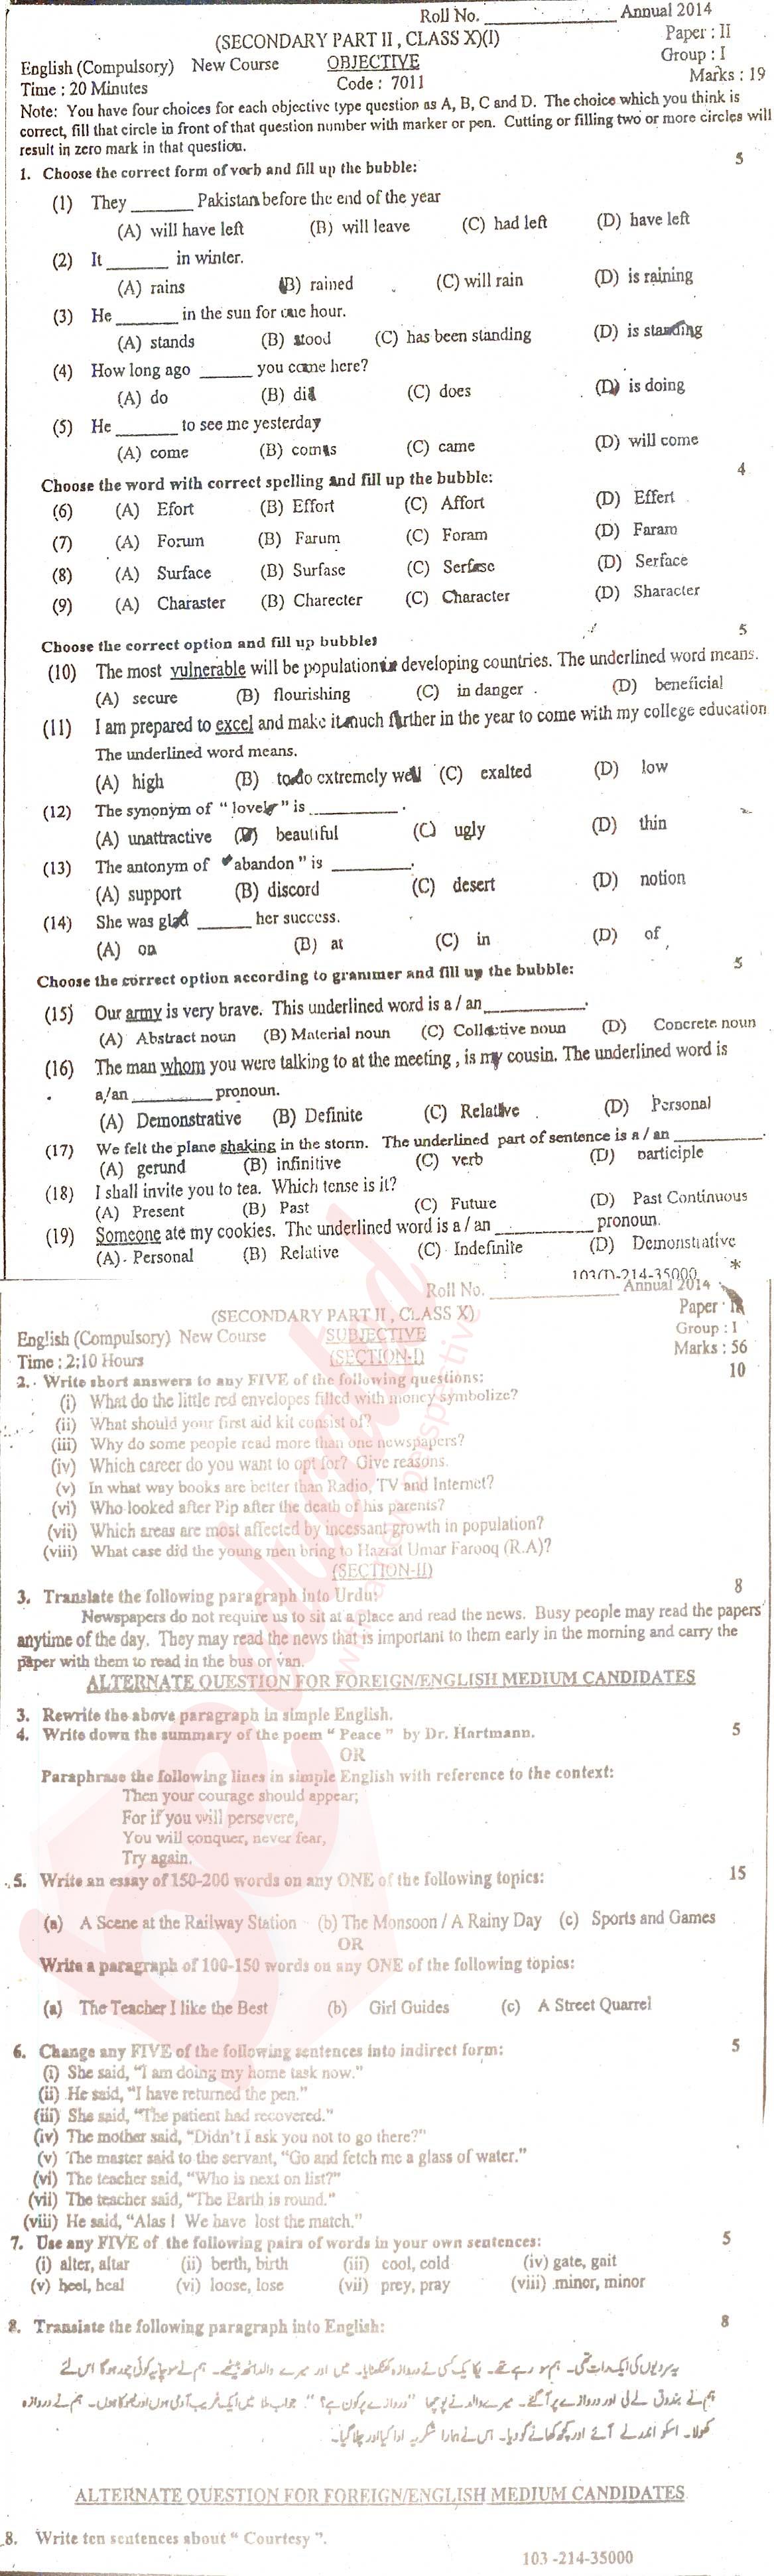 English 10th class Past Paper Group 1 BISE Multan 2014